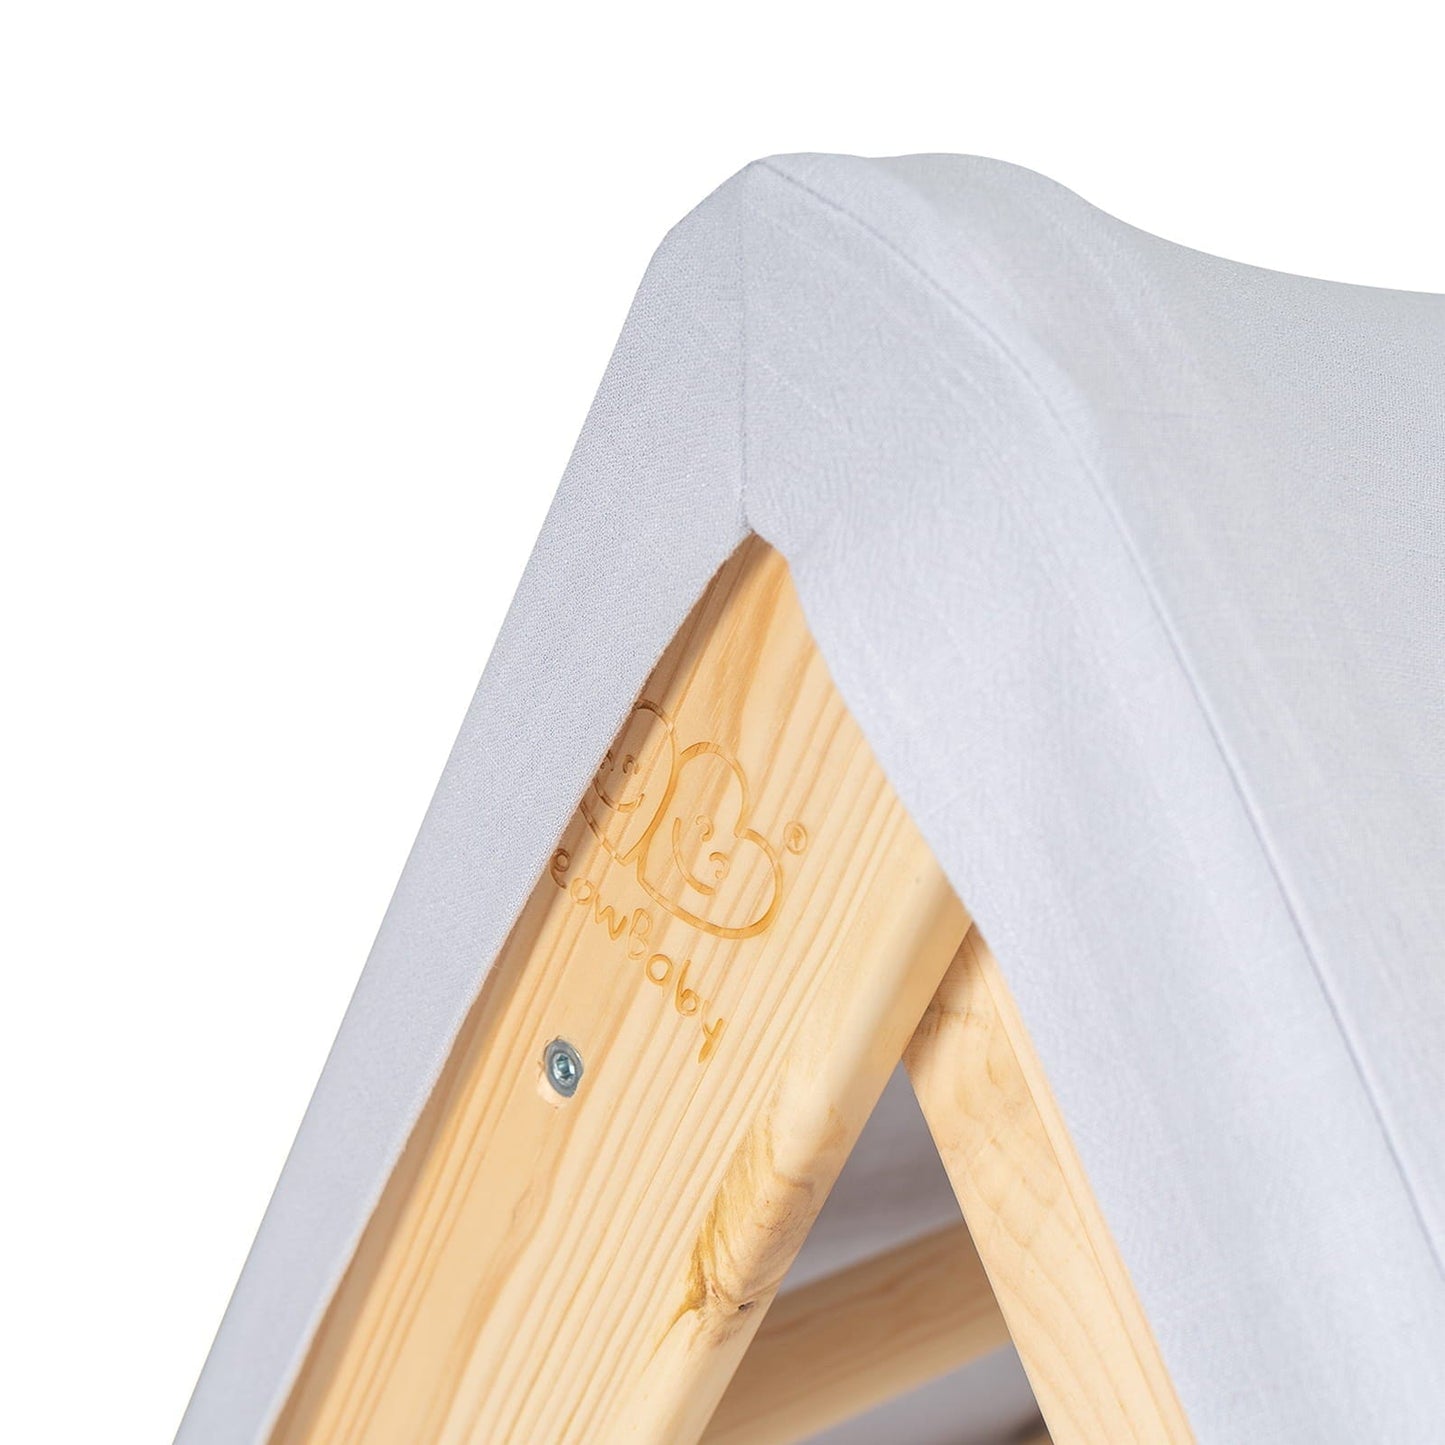 Folding Play House With Ladder For Kids By MeowBaby Grey & Blue Natural